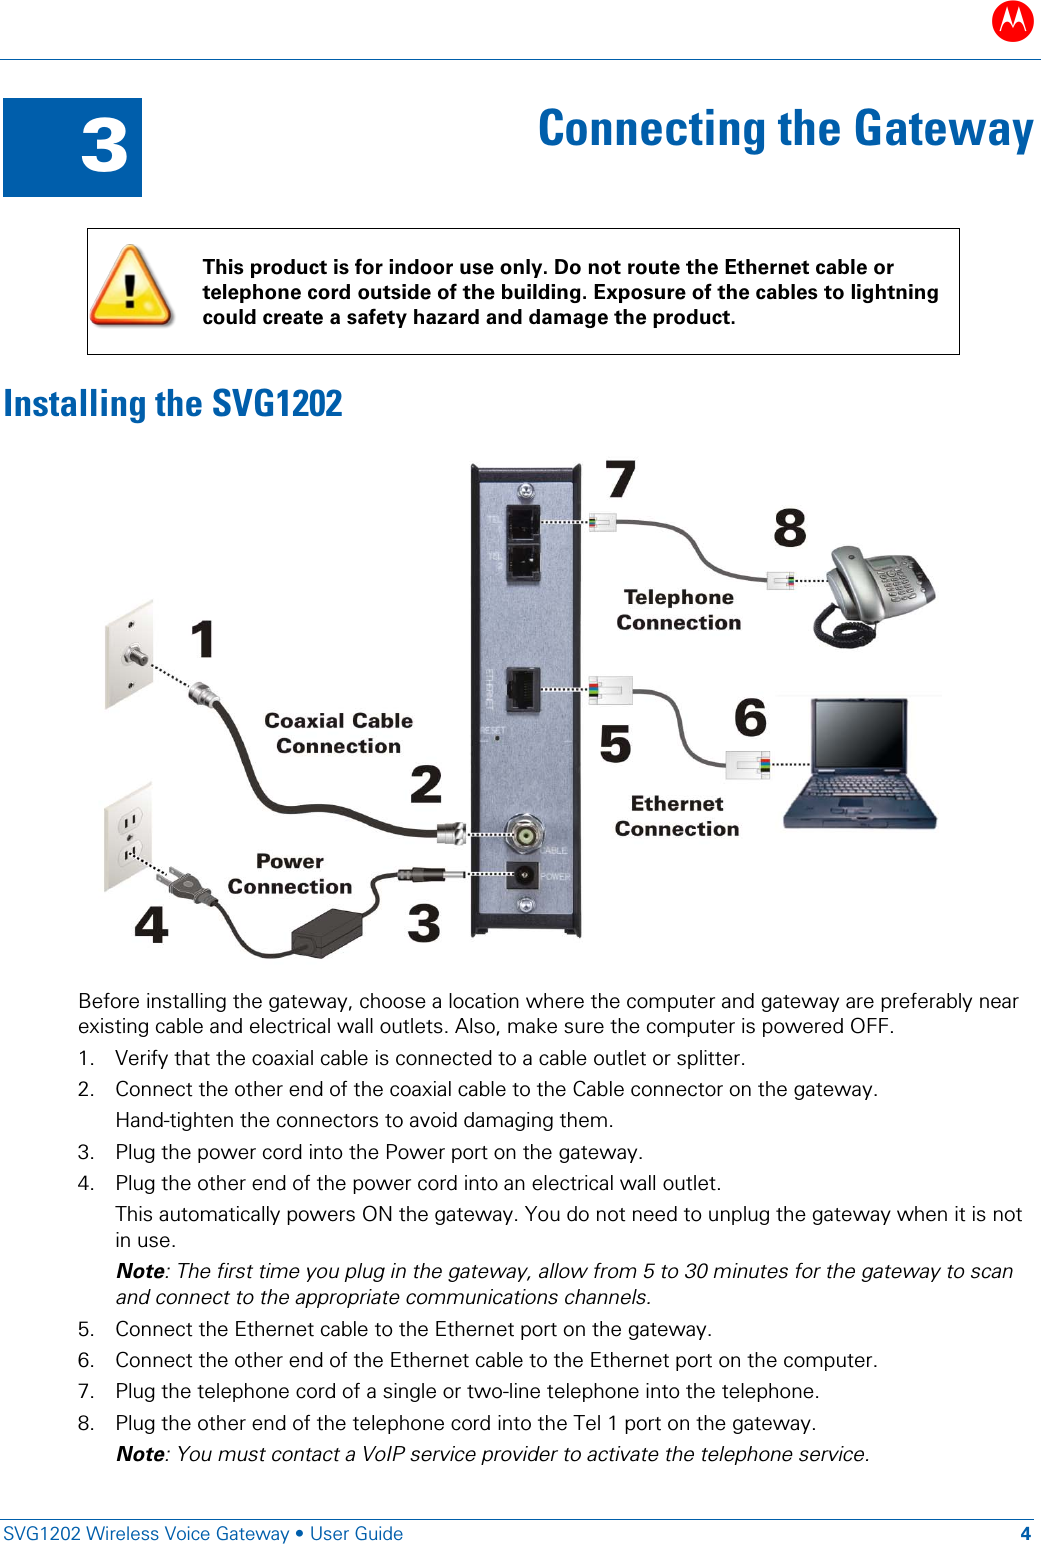 B   SVG1202 Wireless Voice Gateway • User Guide 4  3 Connecting the Gateway   This product is for indoor use only. Do not route the Ethernet cable or telephone cord outside of the building. Exposure of the cables to lightning could create a safety hazard and damage the product. Installing the SVG1202  Before installing the gateway, choose a location where the computer and gateway are preferably near existing cable and electrical wall outlets. Also, make sure the computer is powered OFF. 1. Verify that the coaxial cable is connected to a cable outlet or splitter. 2. Connect the other end of the coaxial cable to the Cable connector on the gateway.  Hand-tighten the connectors to avoid damaging them. 3. Plug the power cord into the Power port on the gateway. 4. Plug the other end of the power cord into an electrical wall outlet.  This automatically powers ON the gateway. You do not need to unplug the gateway when it is not in use.  Note: The first time you plug in the gateway, allow from 5 to 30 minutes for the gateway to scan and connect to the appropriate communications channels. 5. Connect the Ethernet cable to the Ethernet port on the gateway. 6. Connect the other end of the Ethernet cable to the Ethernet port on the computer. 7. Plug the telephone cord of a single or two-line telephone into the telephone. 8. Plug the other end of the telephone cord into the Tel 1 port on the gateway. Note: You must contact a VoIP service provider to activate the telephone service. 